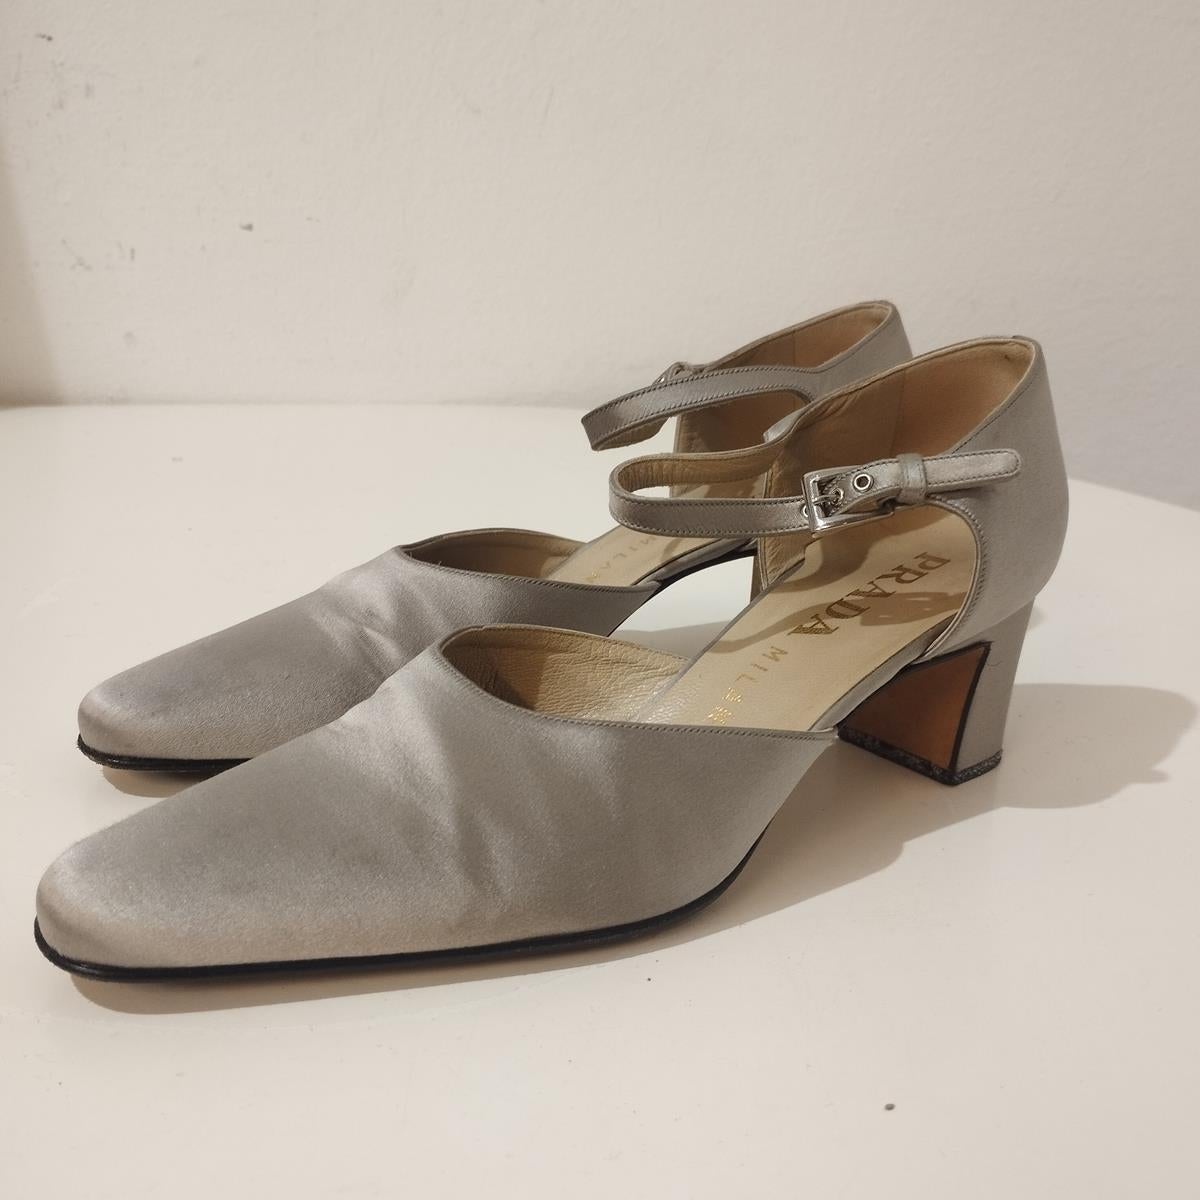 Classic vintage Prada shoes
Vintage
Satin
Grey color
Ankle strap
Heel cm 5,5 (2,16 inches)
Worldwide fast shipping included in the price